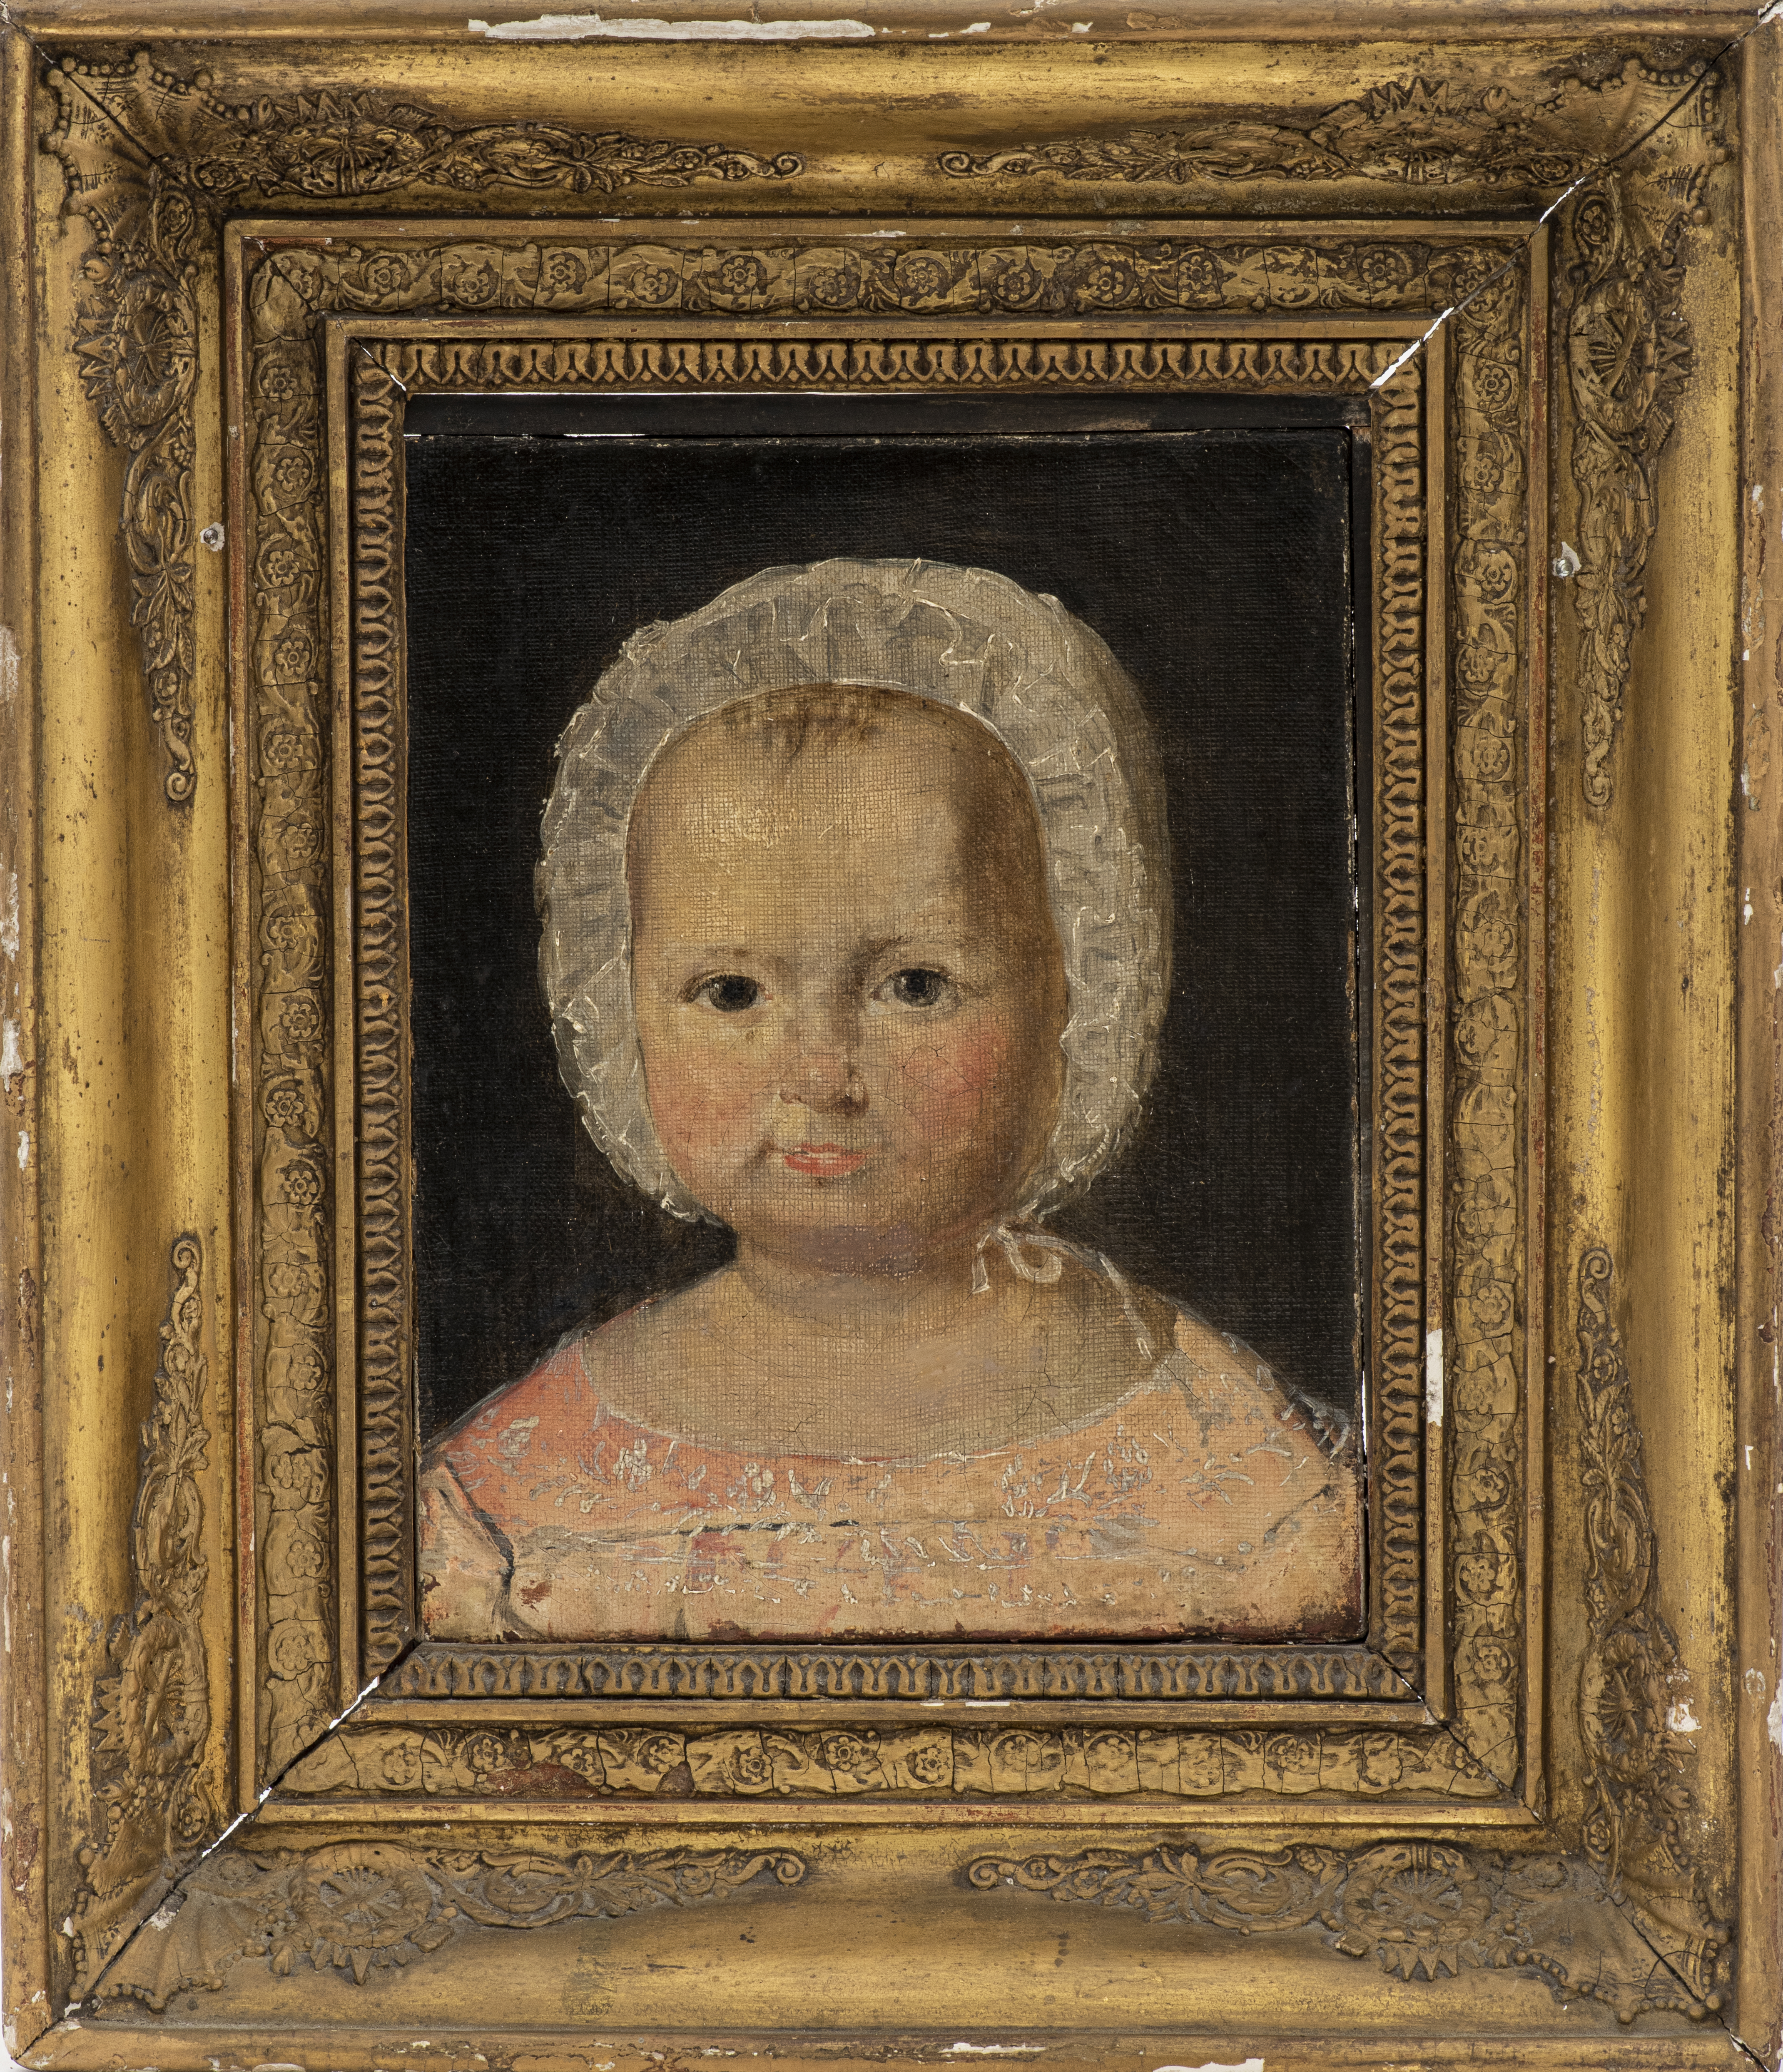 EARLY 19TH C. FRENCH PORTRAIT OF